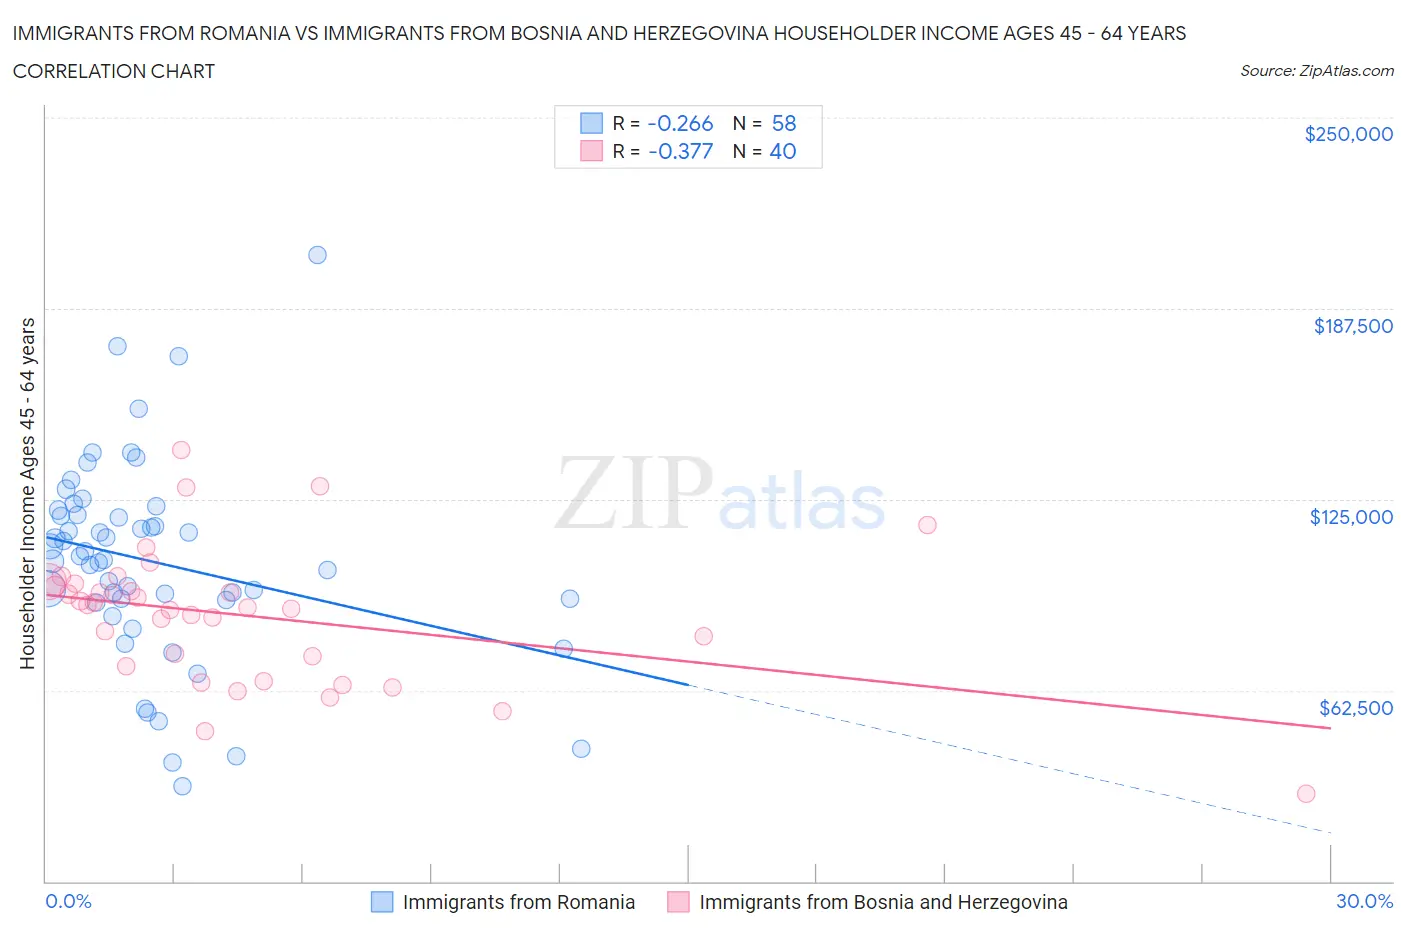 Immigrants from Romania vs Immigrants from Bosnia and Herzegovina Householder Income Ages 45 - 64 years